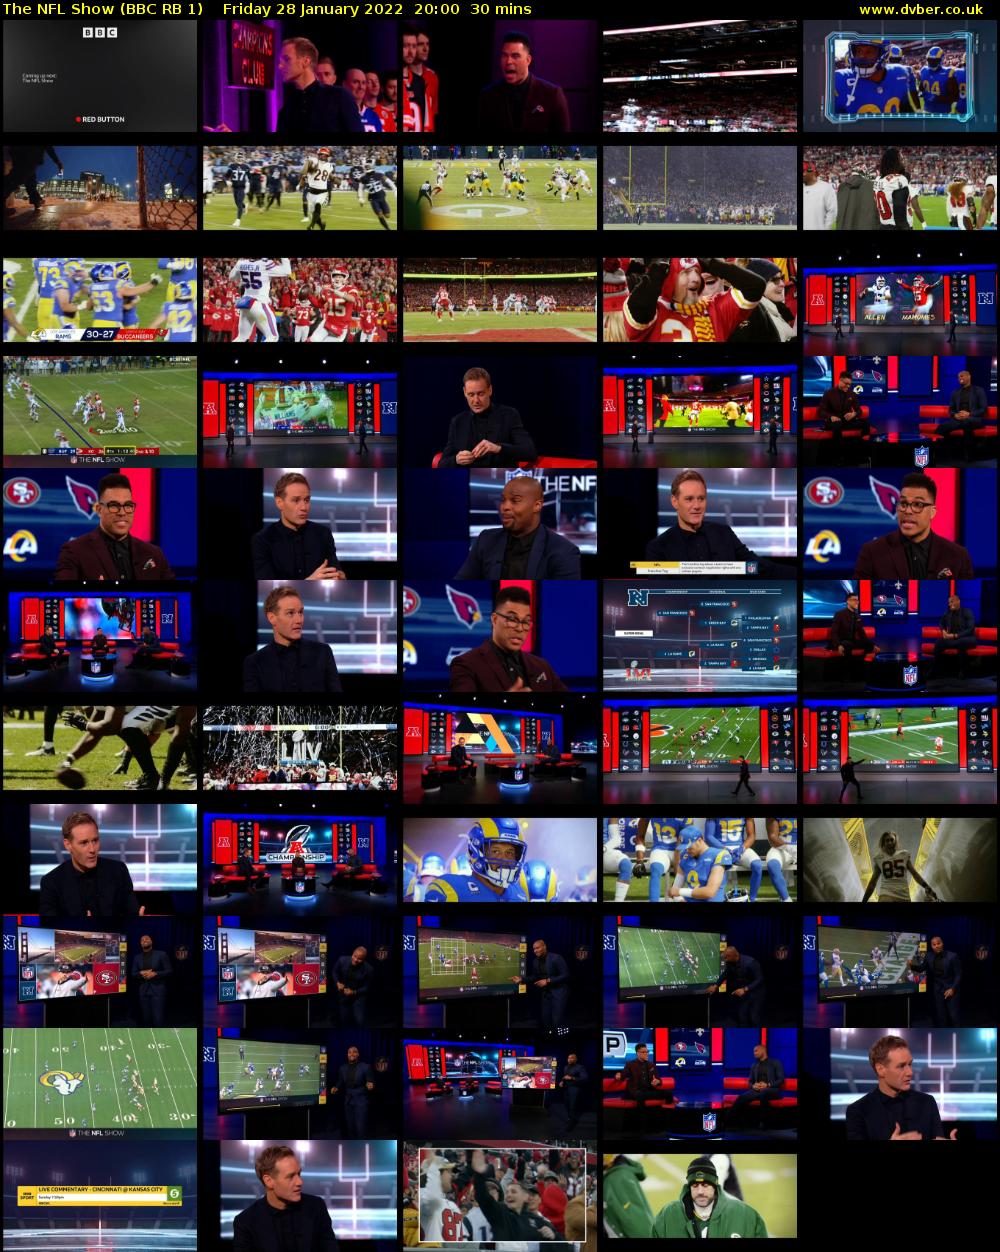 The NFL Show (BBC RB 1) Friday 28 January 2022 20:00 - 20:30